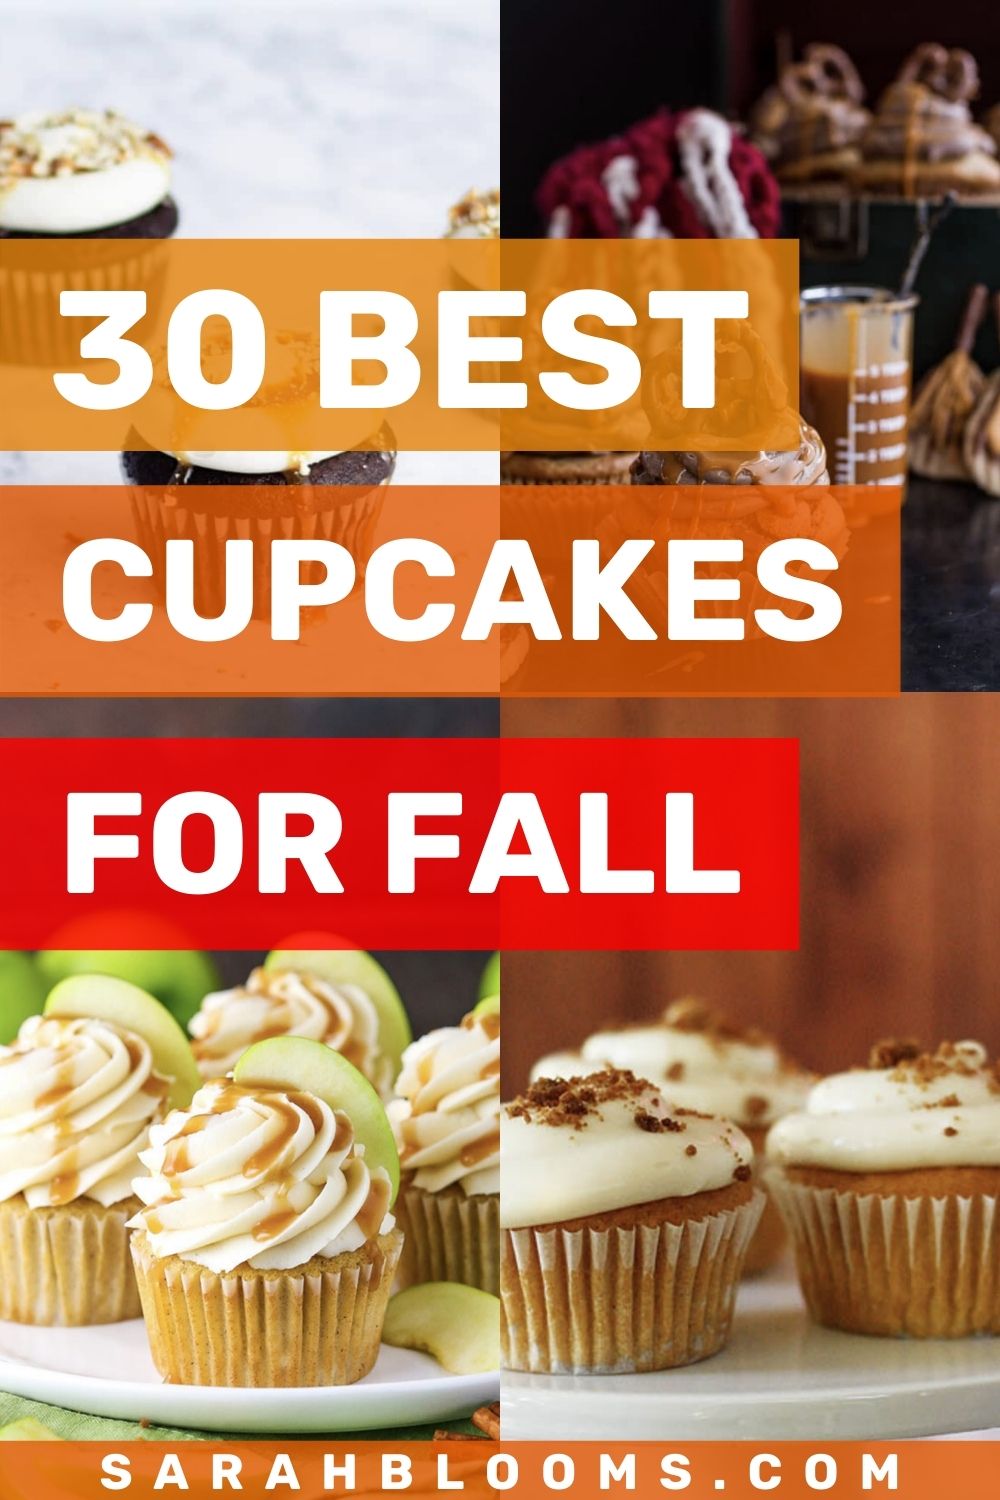 30 Best Fall Cupcakes for Fall Entertaining or Just Because! Whip up these Easy + Delicious Fall Flavored Cupcakes for your next fall dinner party or Thanksgiving dinner! Enjoy all your favorite fall flavors with these Easy Fall Cupcake Recipes anyone can make. #fallcupcakes #falldesserts #fallrecipes #thanksgivingdesserts #thanksgivingrecipes